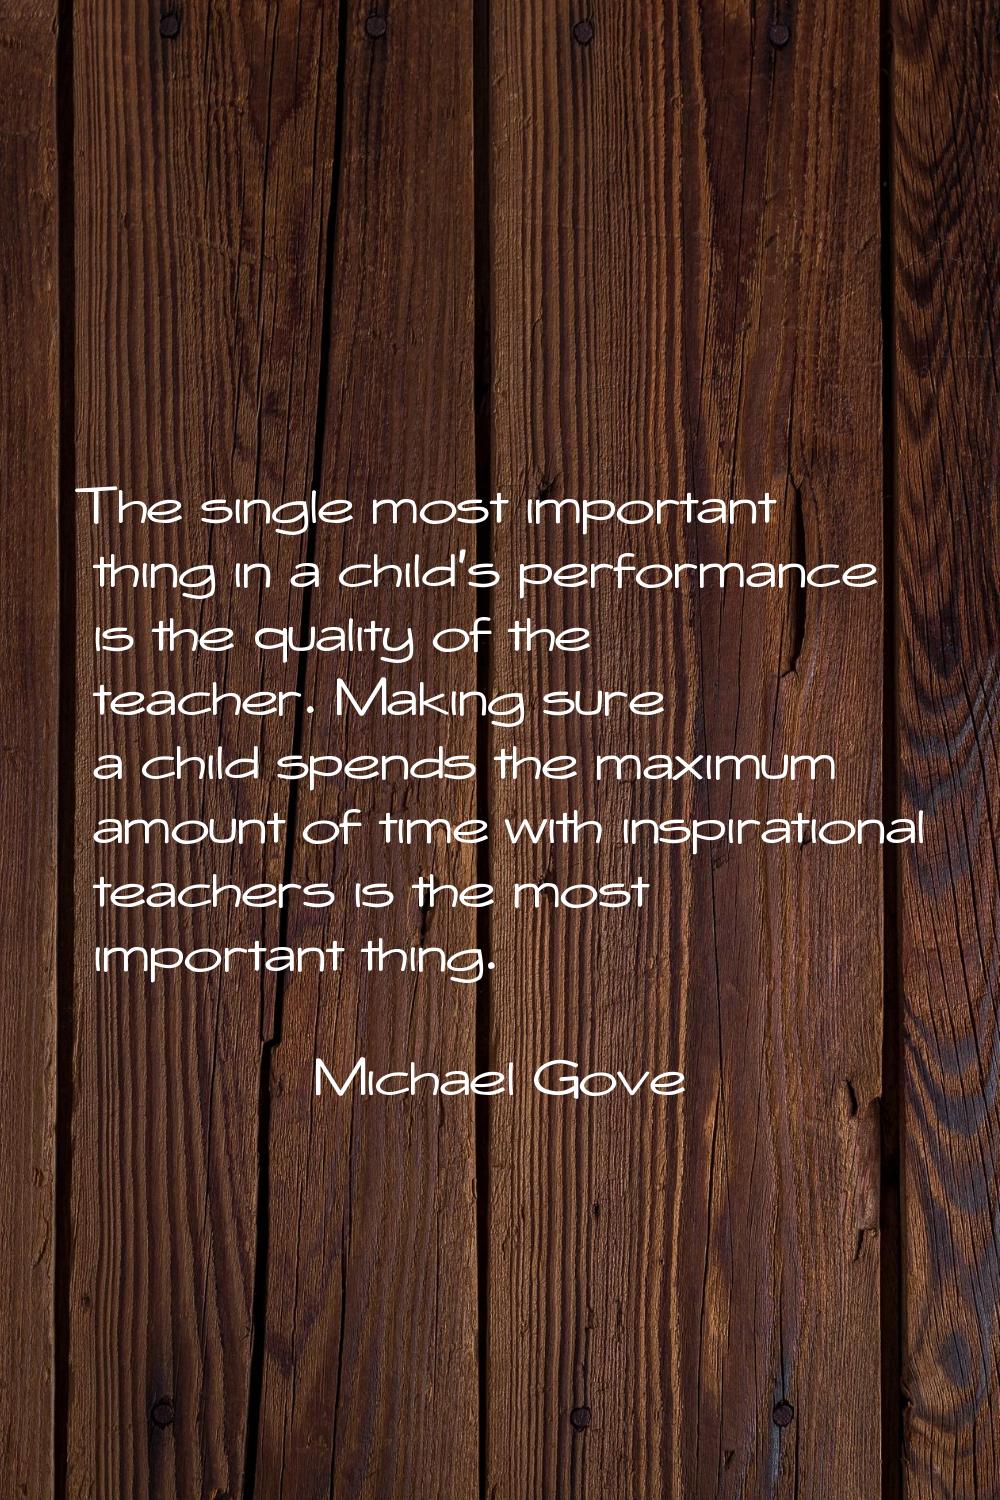 The single most important thing in a child's performance is the quality of the teacher. Making sure